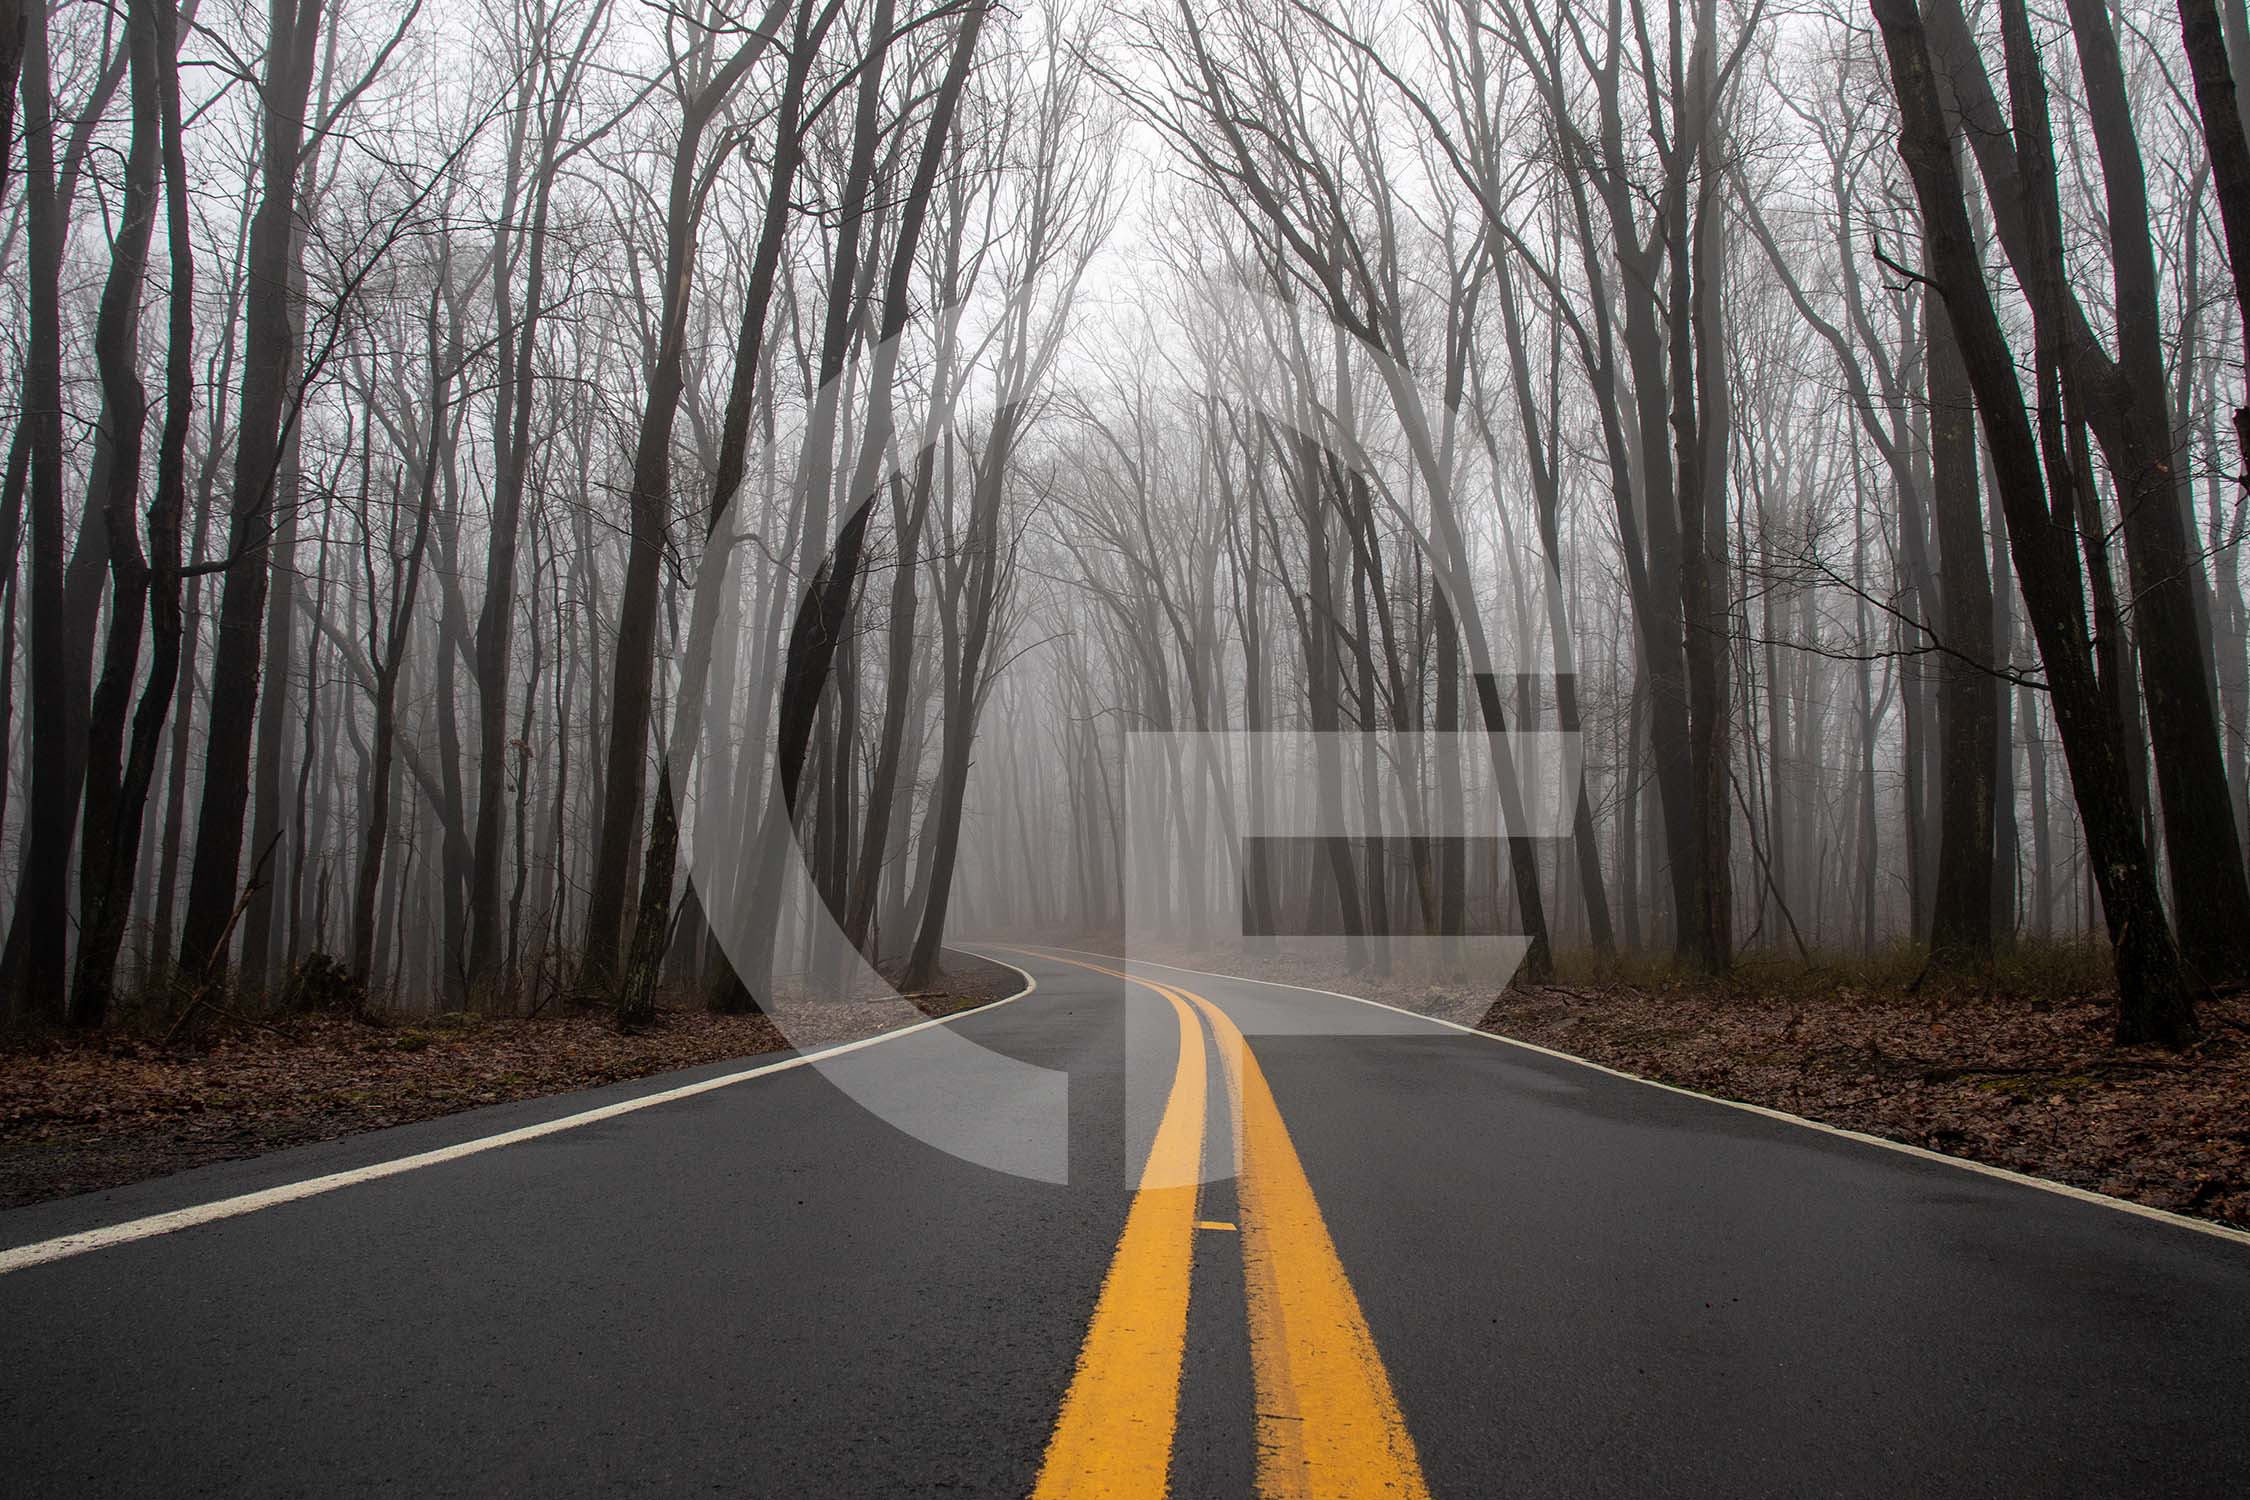 Road curving into the foggy forest